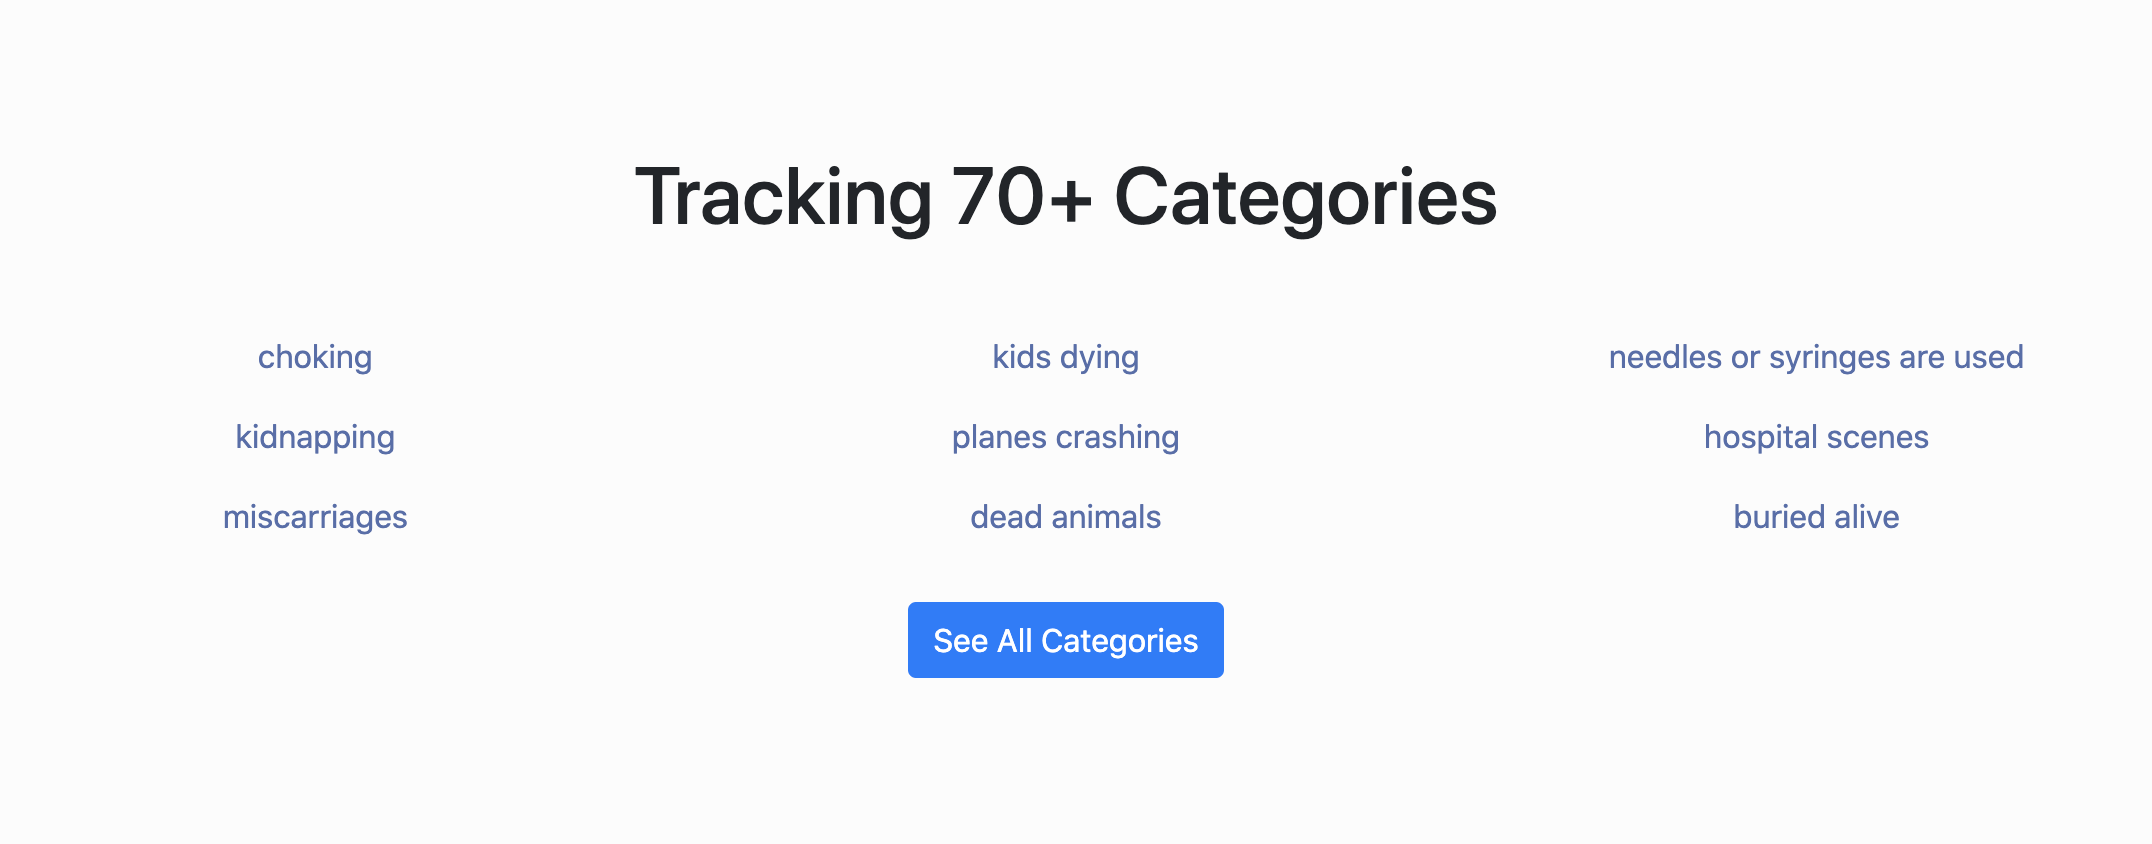 The site, which advertises tracking 70+ categories, like choking and kidnapping